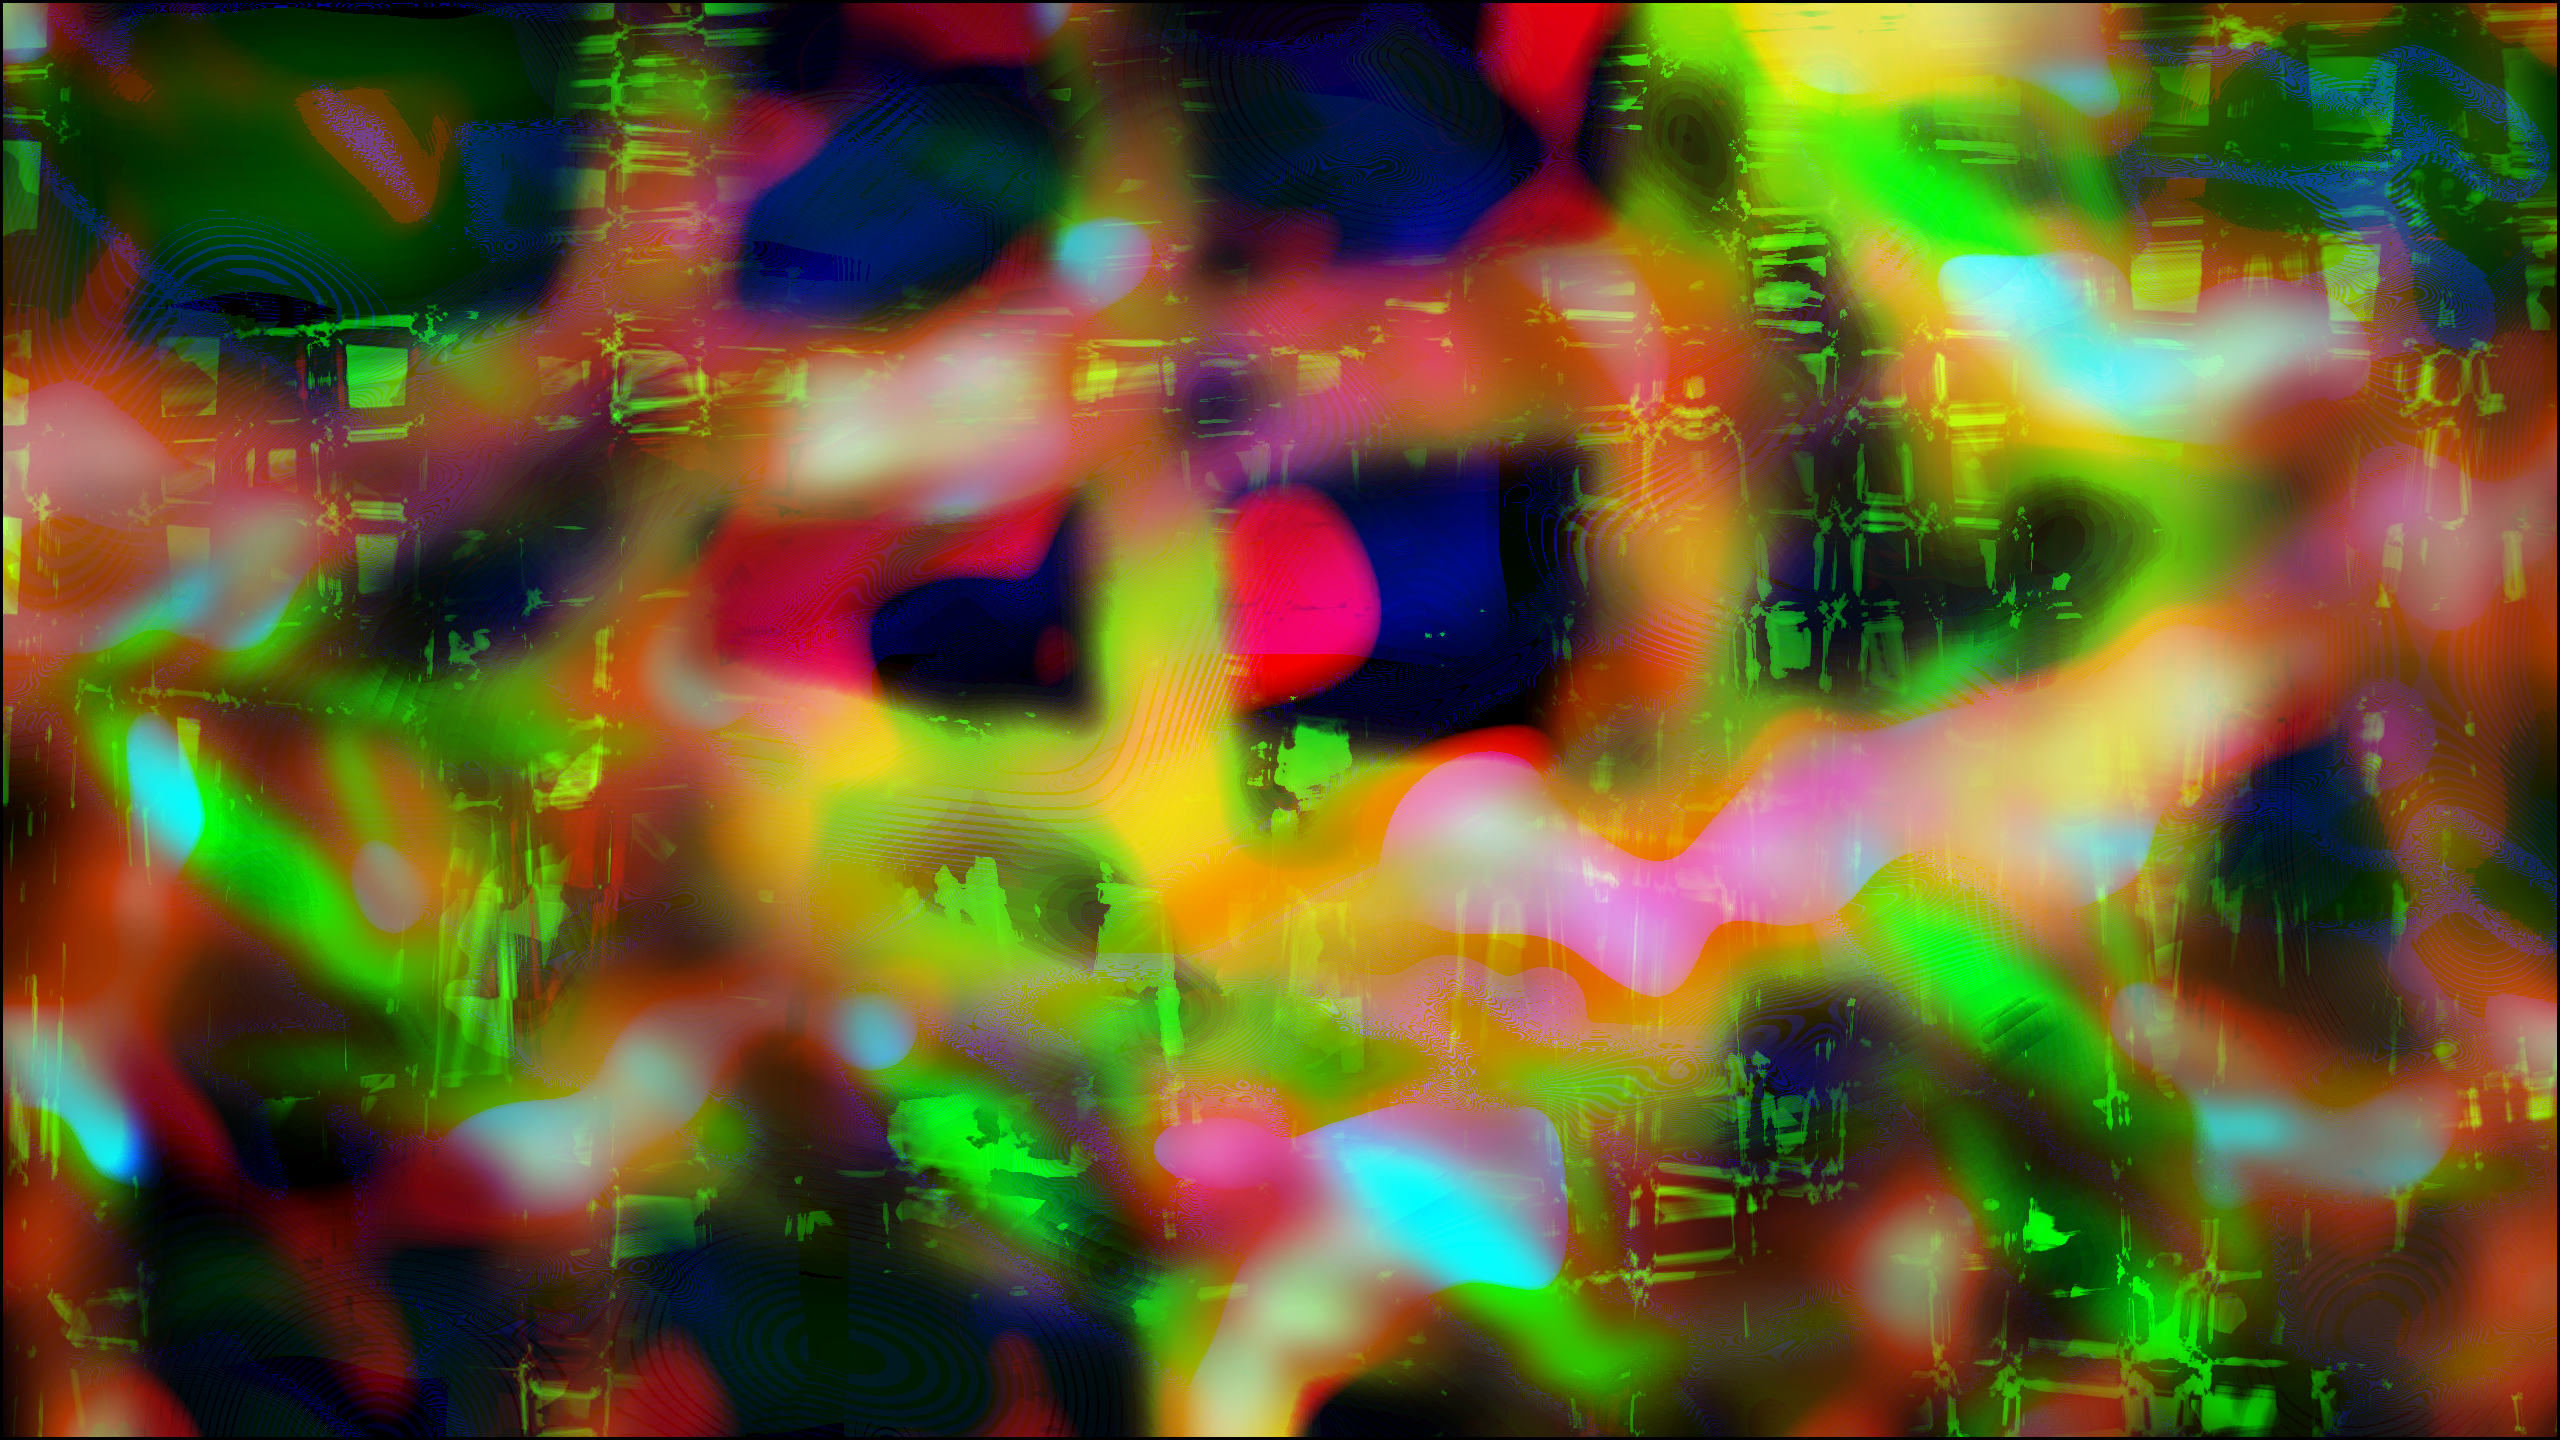 General 2560x1440 abstract LSD trippy brightness space psychedelic digital art artwork surreal